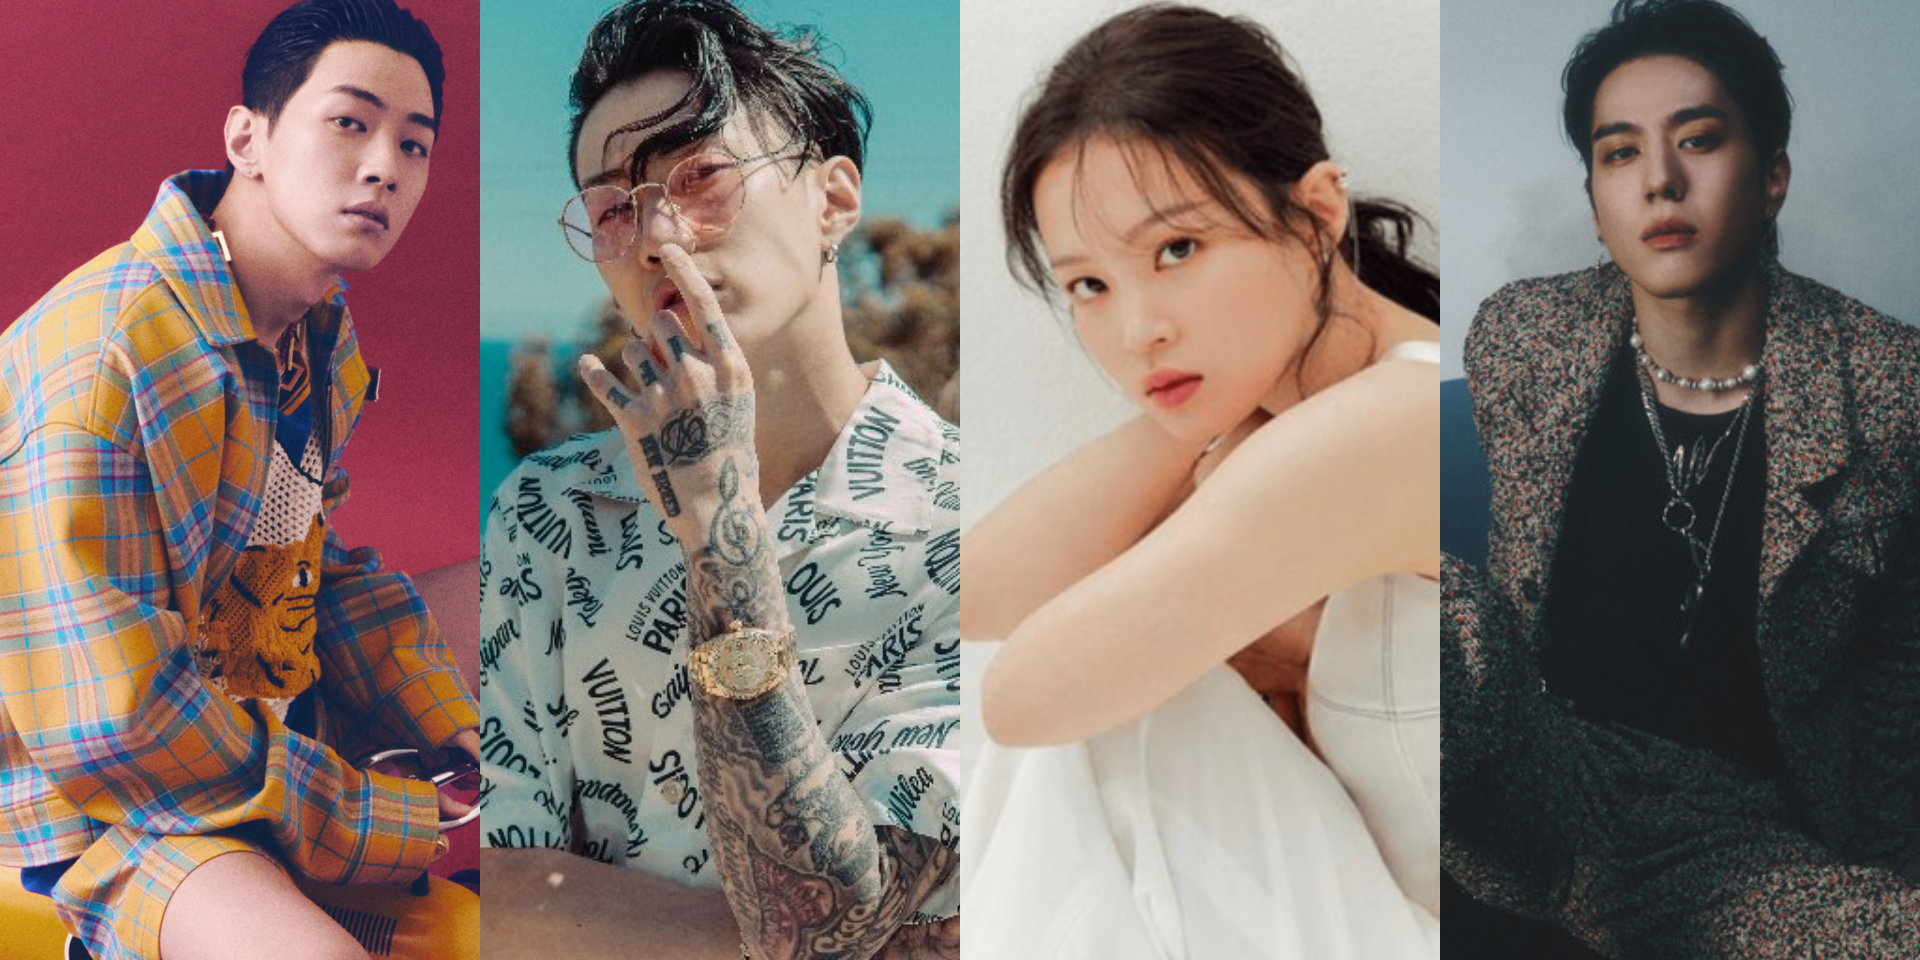 Get to know the artists behind AOMG – Jay Park, GRAY, Lee Hi, GOT7's Yugyeom, and more